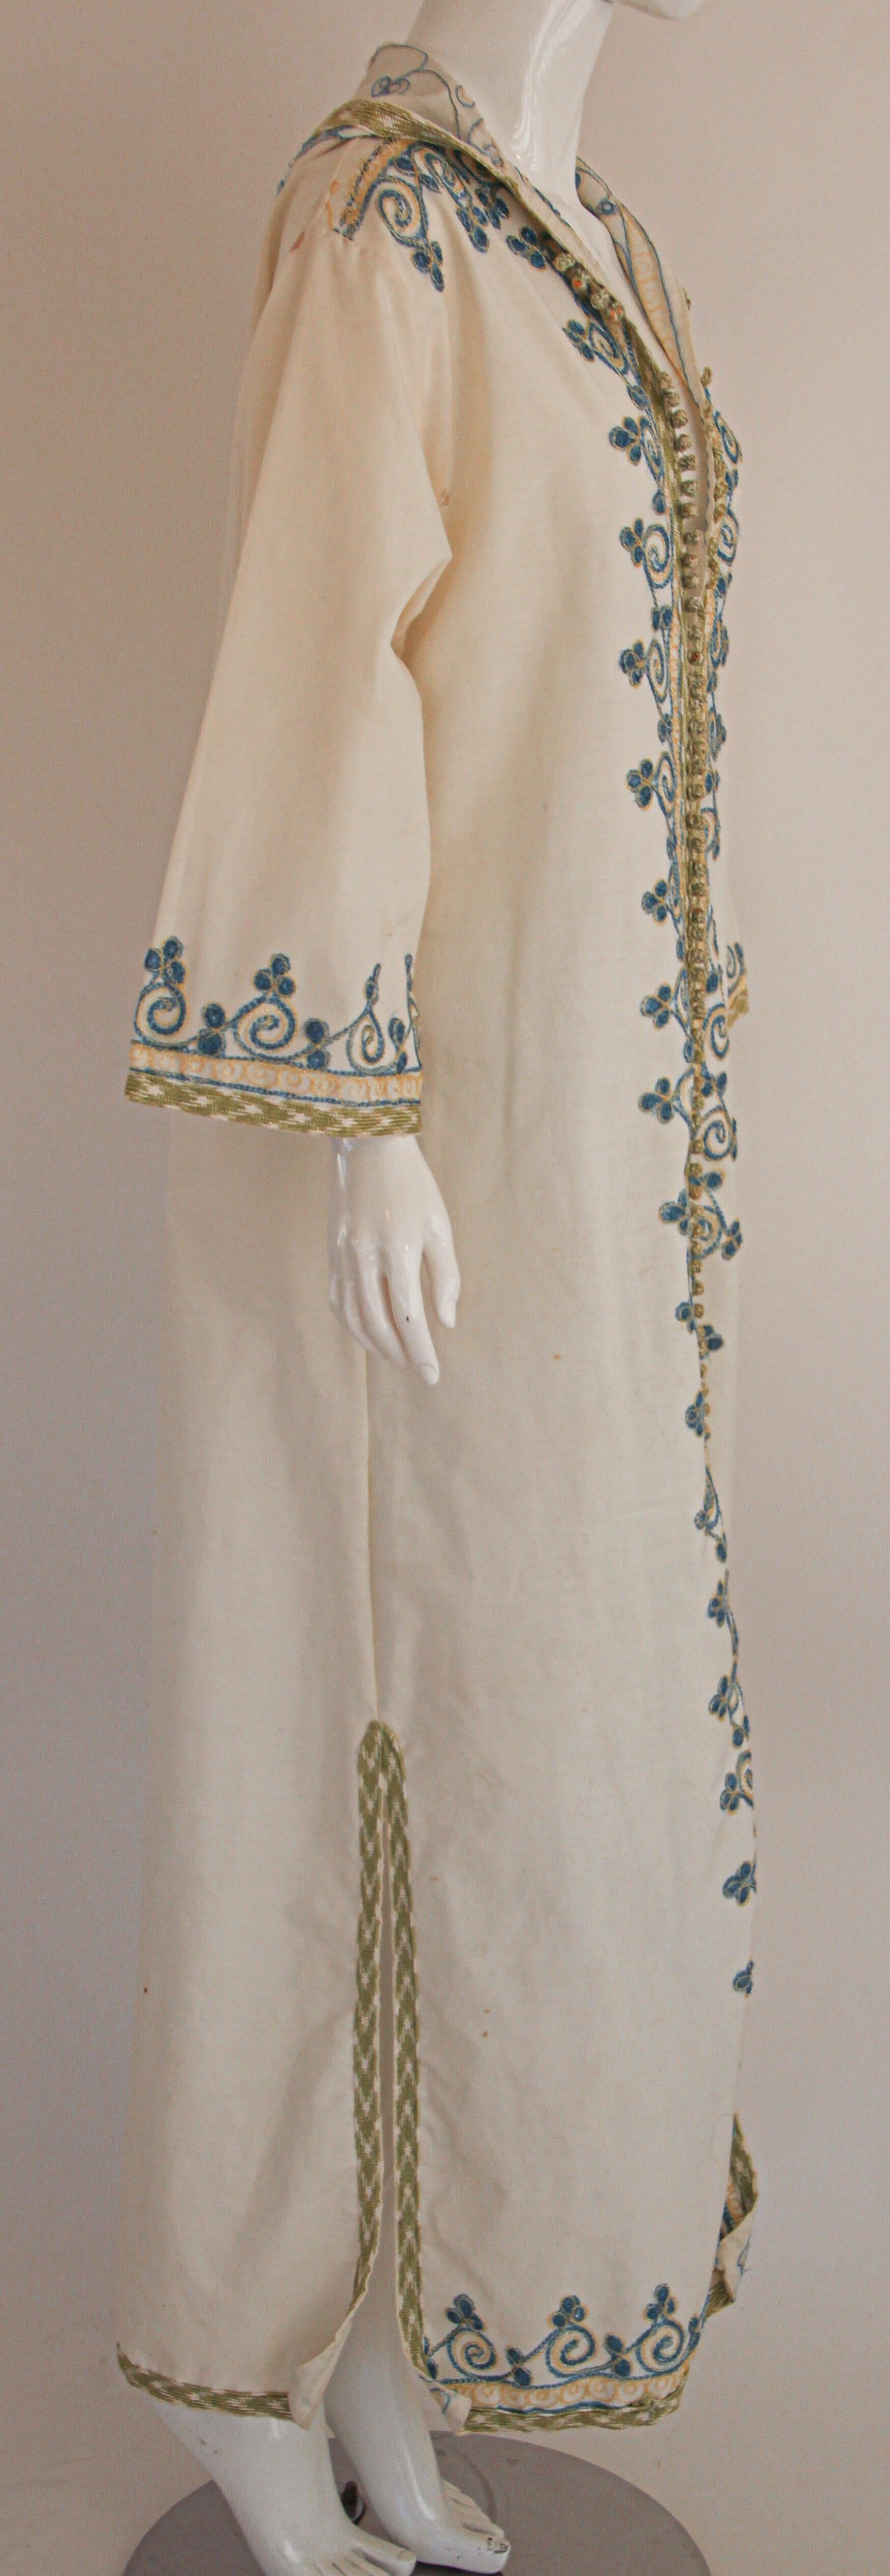 1970s Moroccan Vintage Kaftan White Cotton with Turquoise Embroidered Caftan For Sale 9